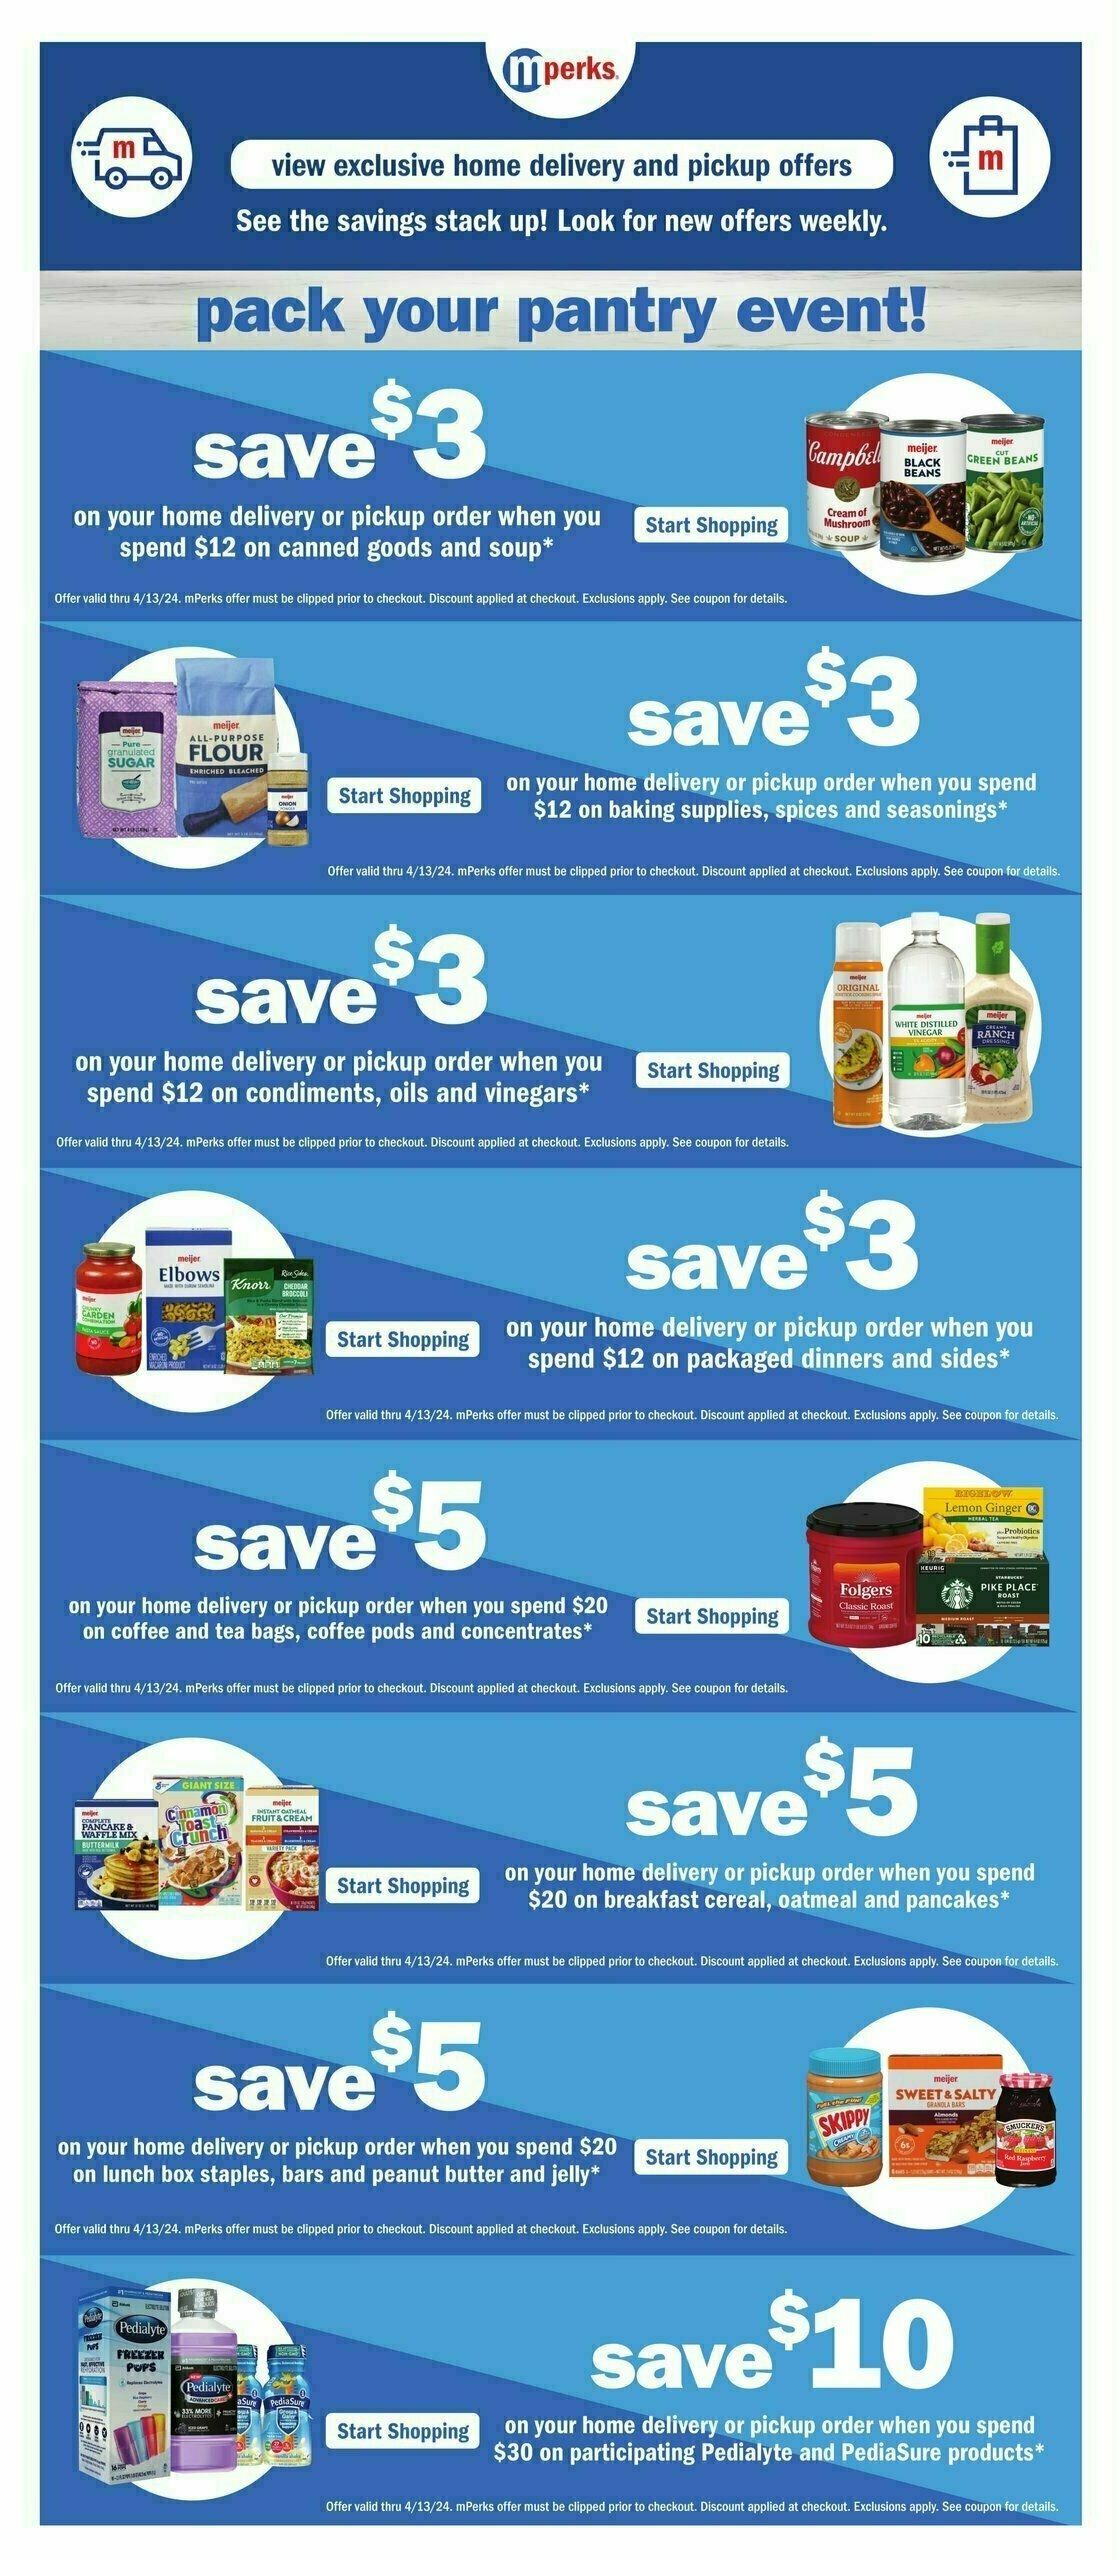 Meijer Weekly Ad from April 7